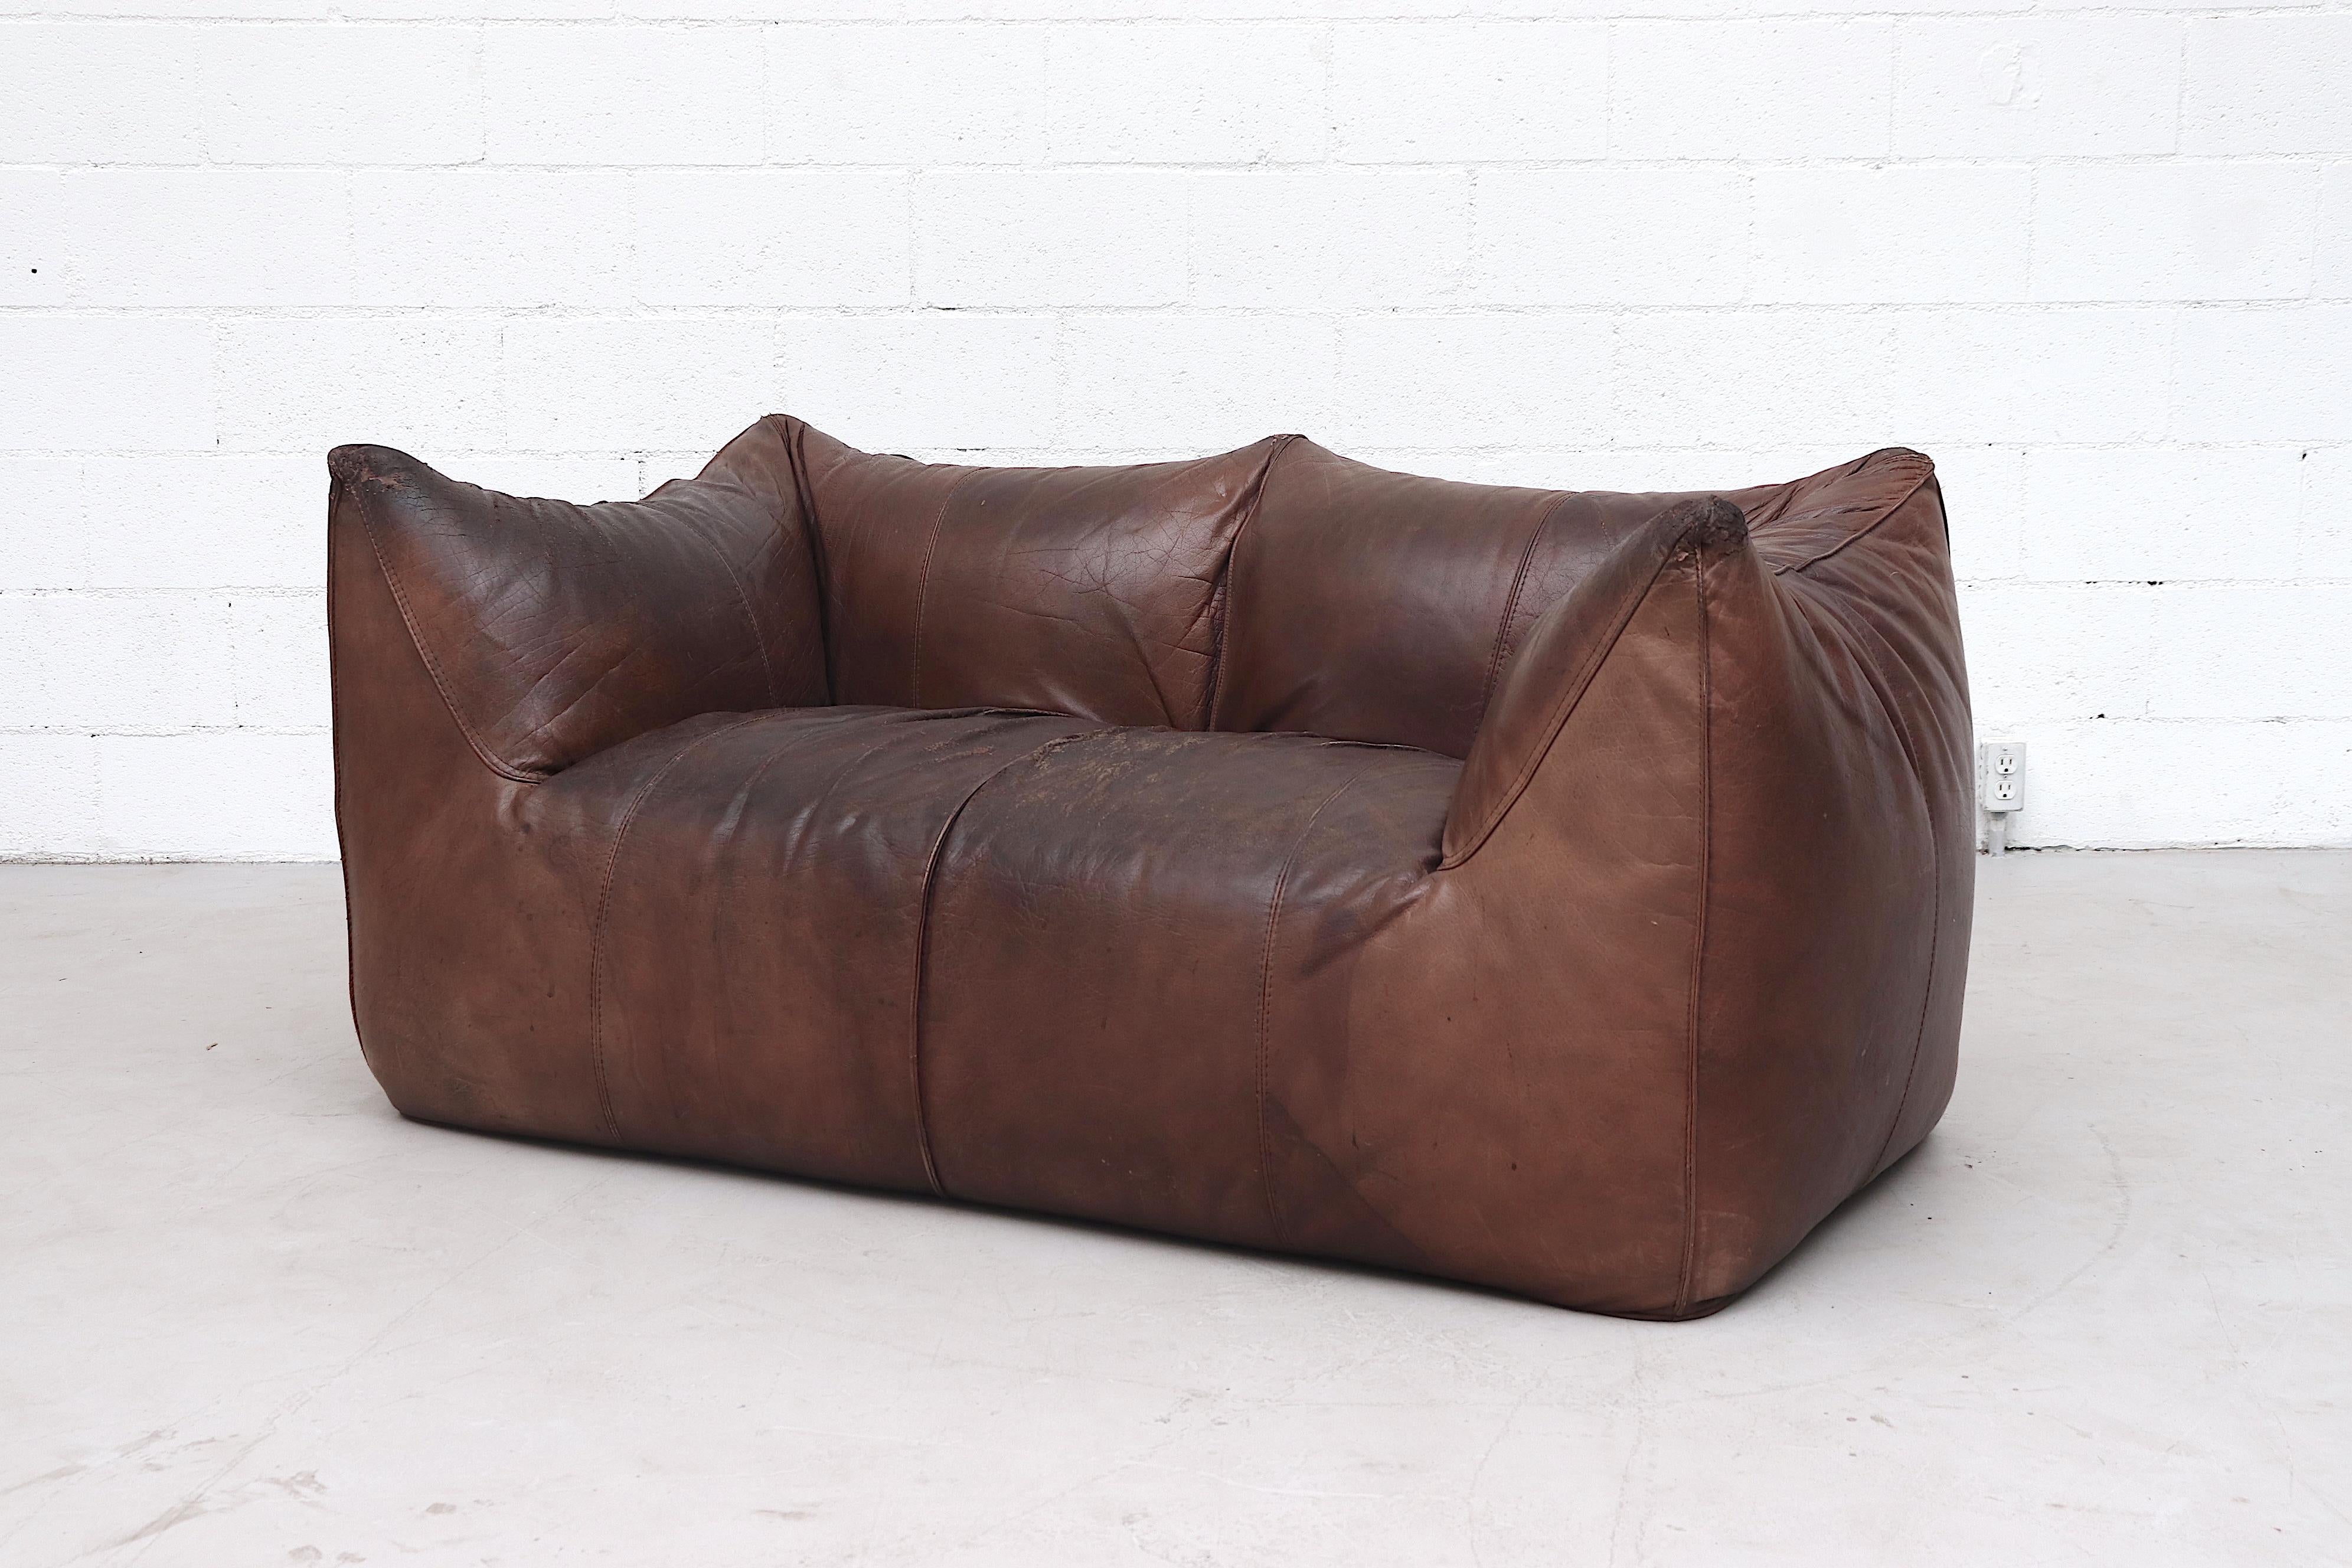 Mario Bellini 'Le Bambole' leather love seat in well worn brown leather. Very worn and used condition with heavy patina and extreme wear consistent with a lot of use. Shows extreme use and has some visible repairs to the top arm corner. As is.